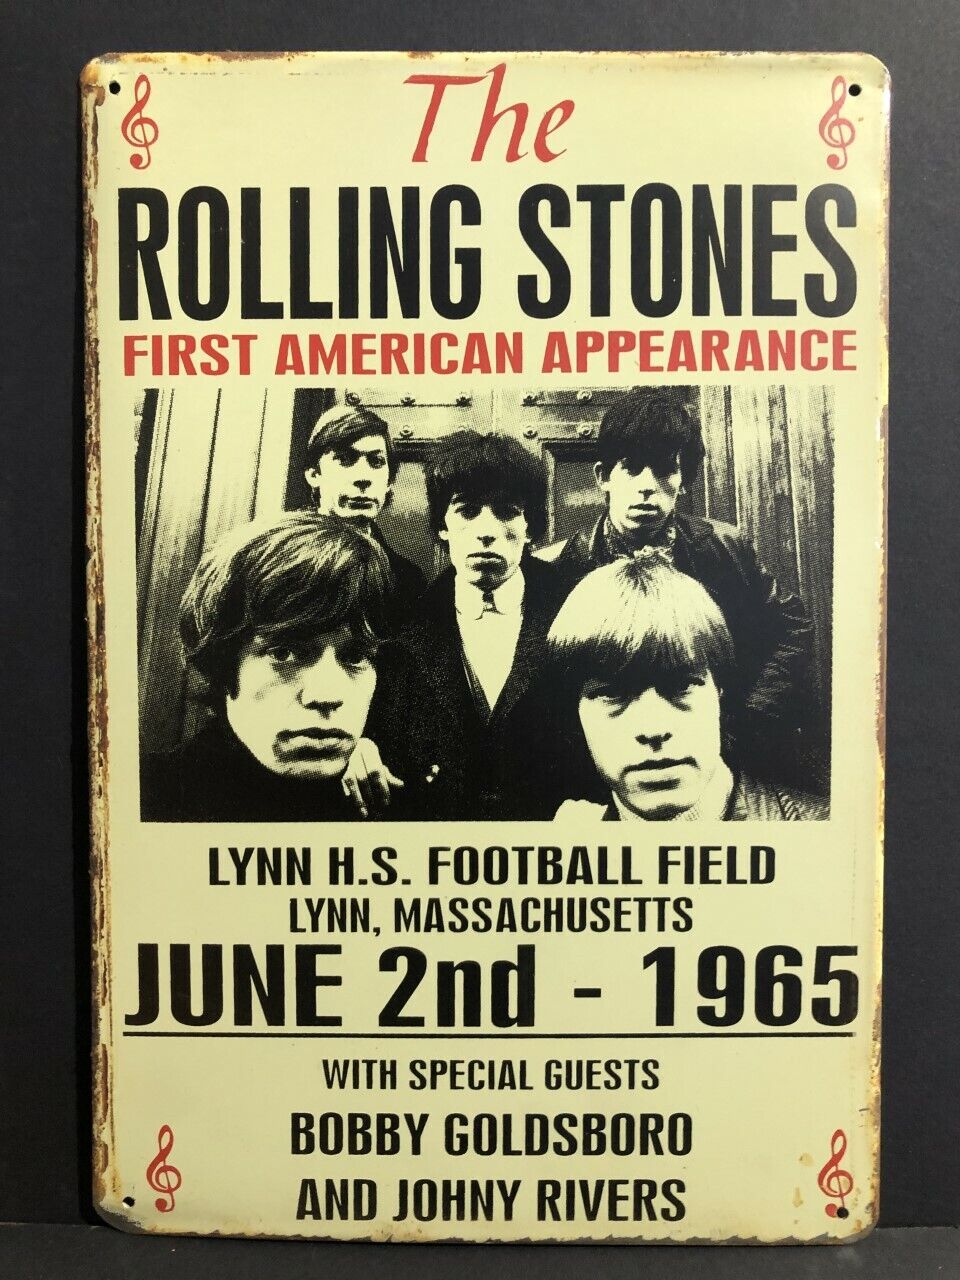 THE ROLLING STONES FIRST AMERICAN APPEARANCE Vintage Retro Metal Sign 30x20cm